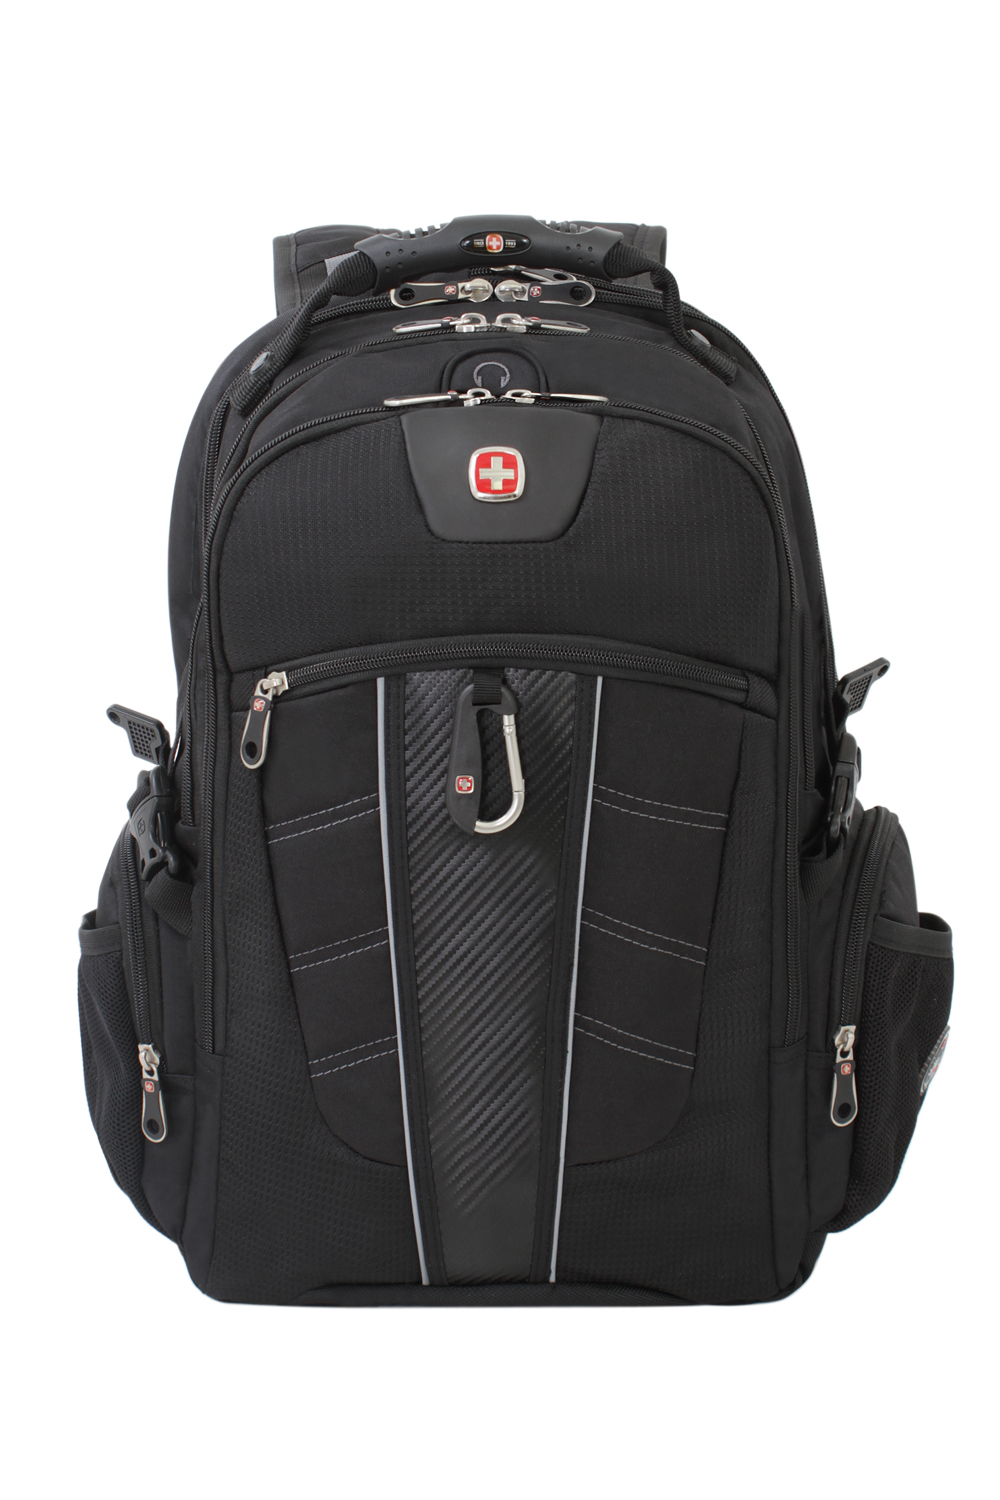 Ideal for Commuting Black Cod Special Edition SwissGear Laptop Backpack with Shoulder Straps Travel Work and School College